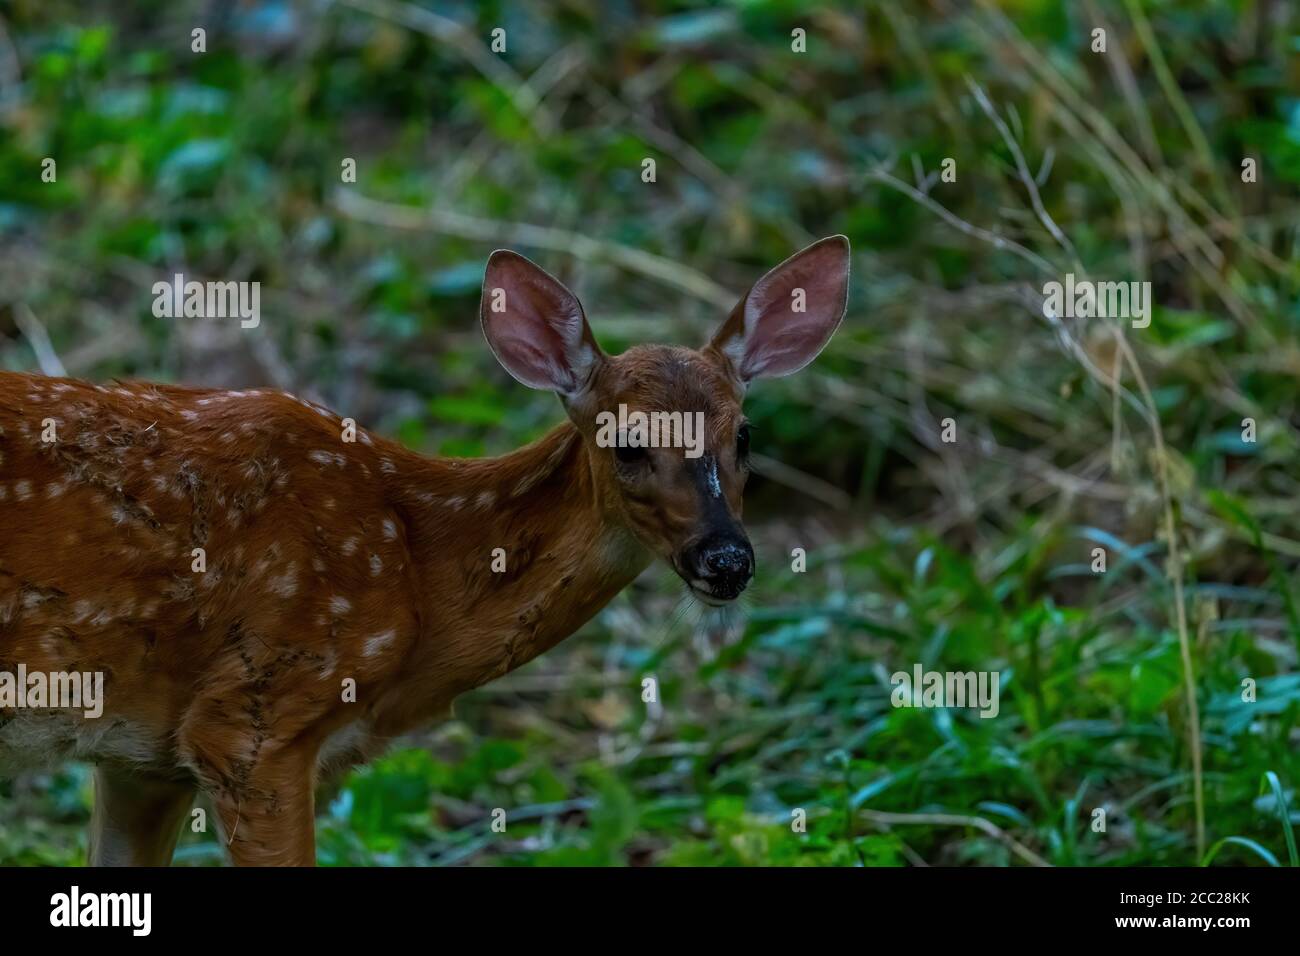 Close-up of a white tailed deer (Odocoileus virginianus) fawn in a forest in Michigan, USA. Stock Photo